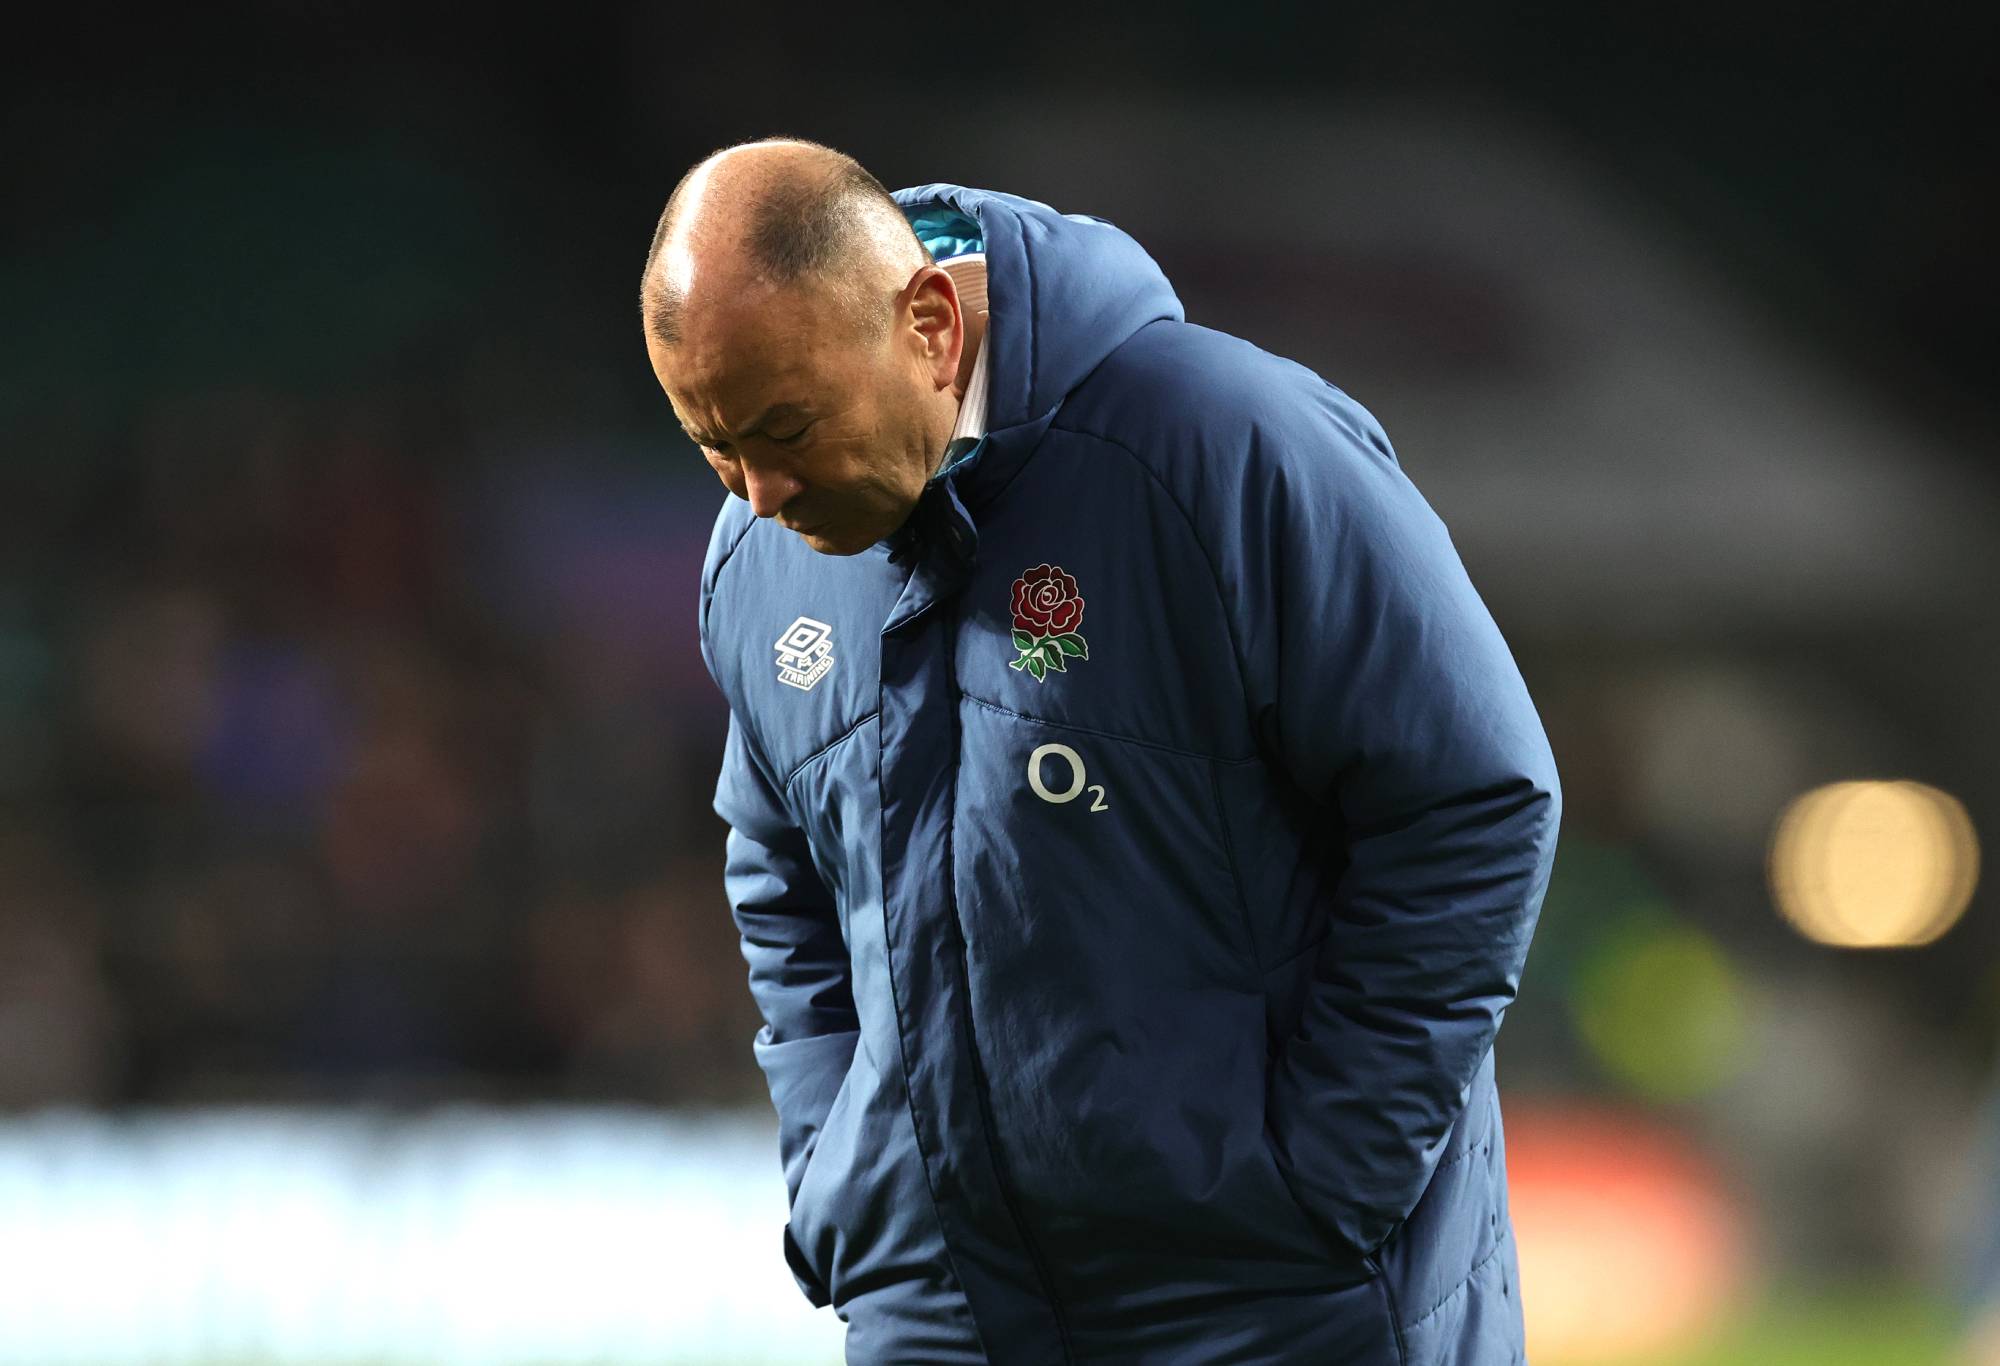 Eddie Jones, the England head coach looks on during the Autumn International match between England and South Africa at Twickenham Stadium on November 26, 2022 in London, England. (Photo by David Rogers/Getty Images)